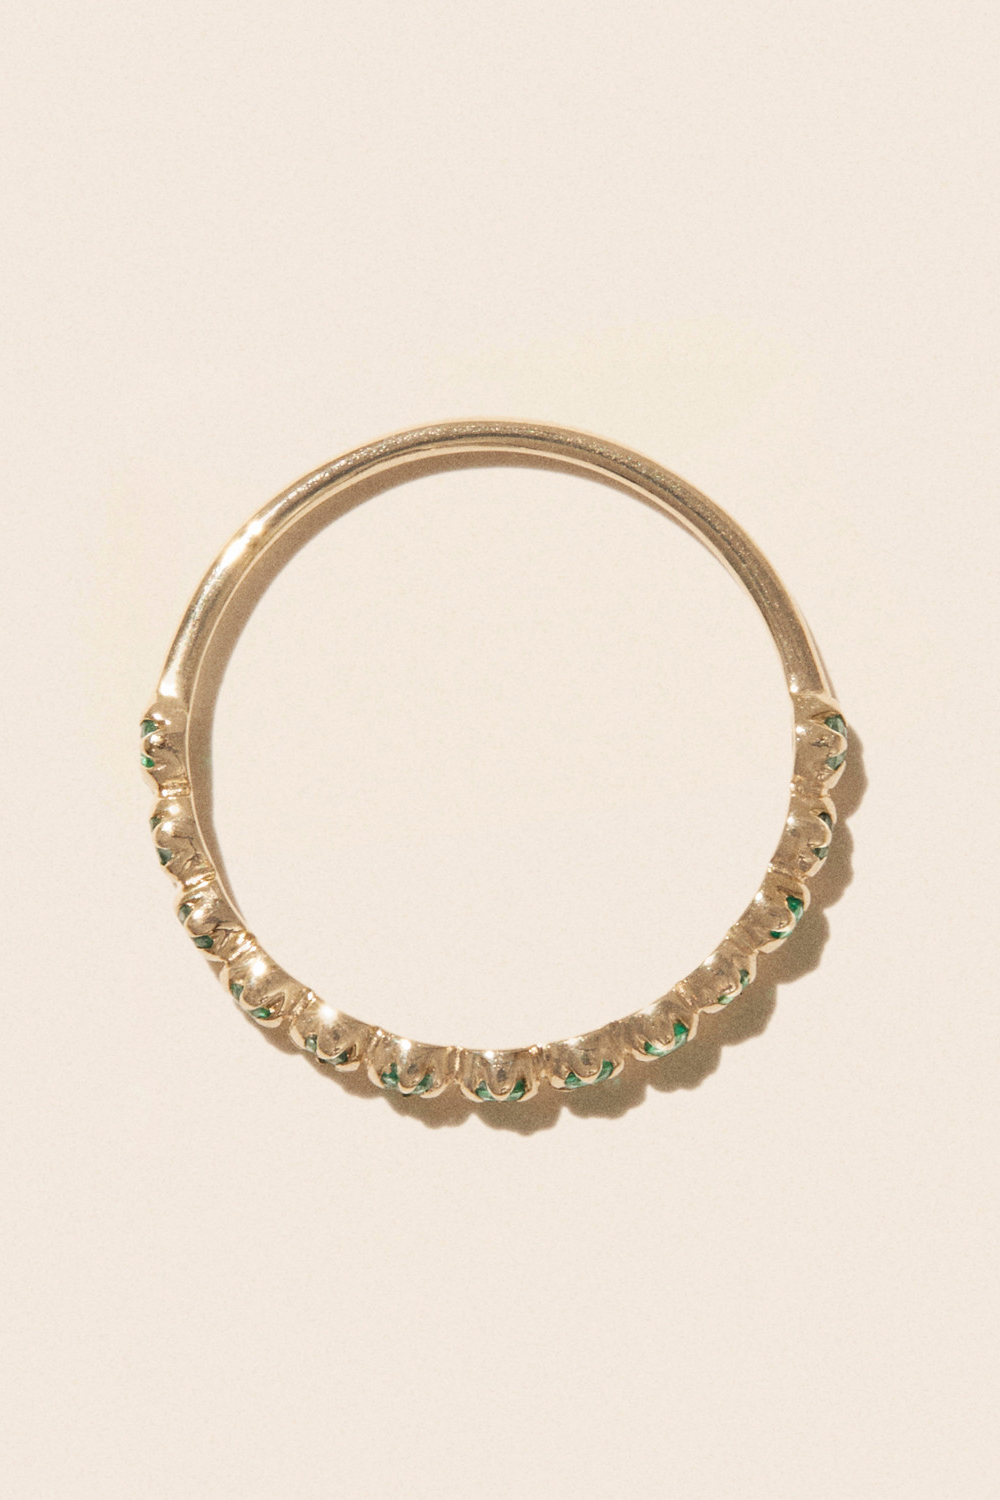 PASCALE MONVOISIN Ava N°2 Ring with Emeralds in Yellow Gold